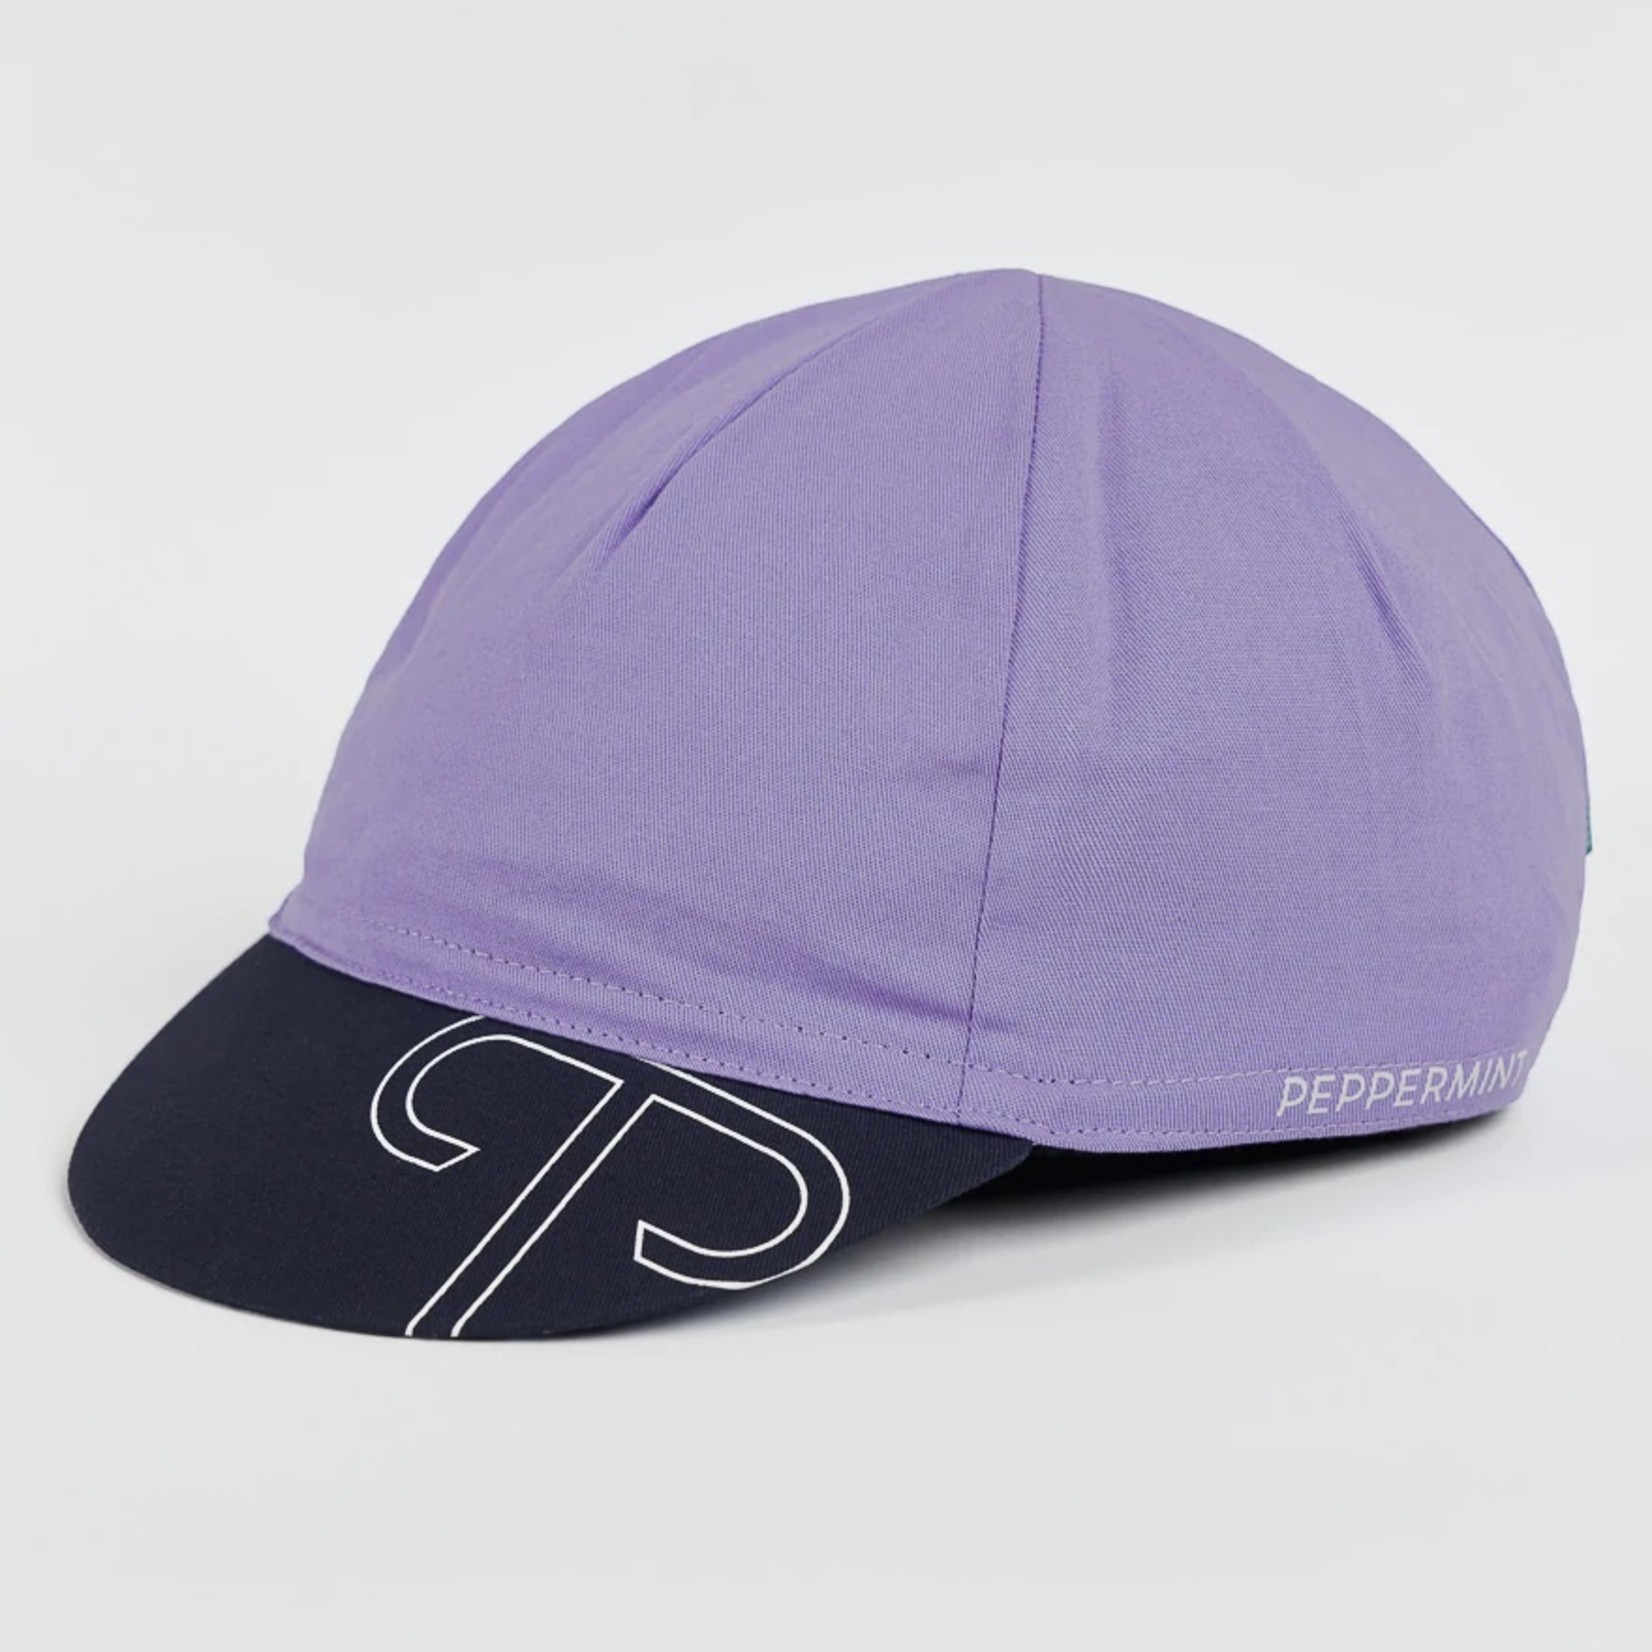 Peppermint '22, PEPPERMINT CYCLING, Cycling Cap, Spring Iris